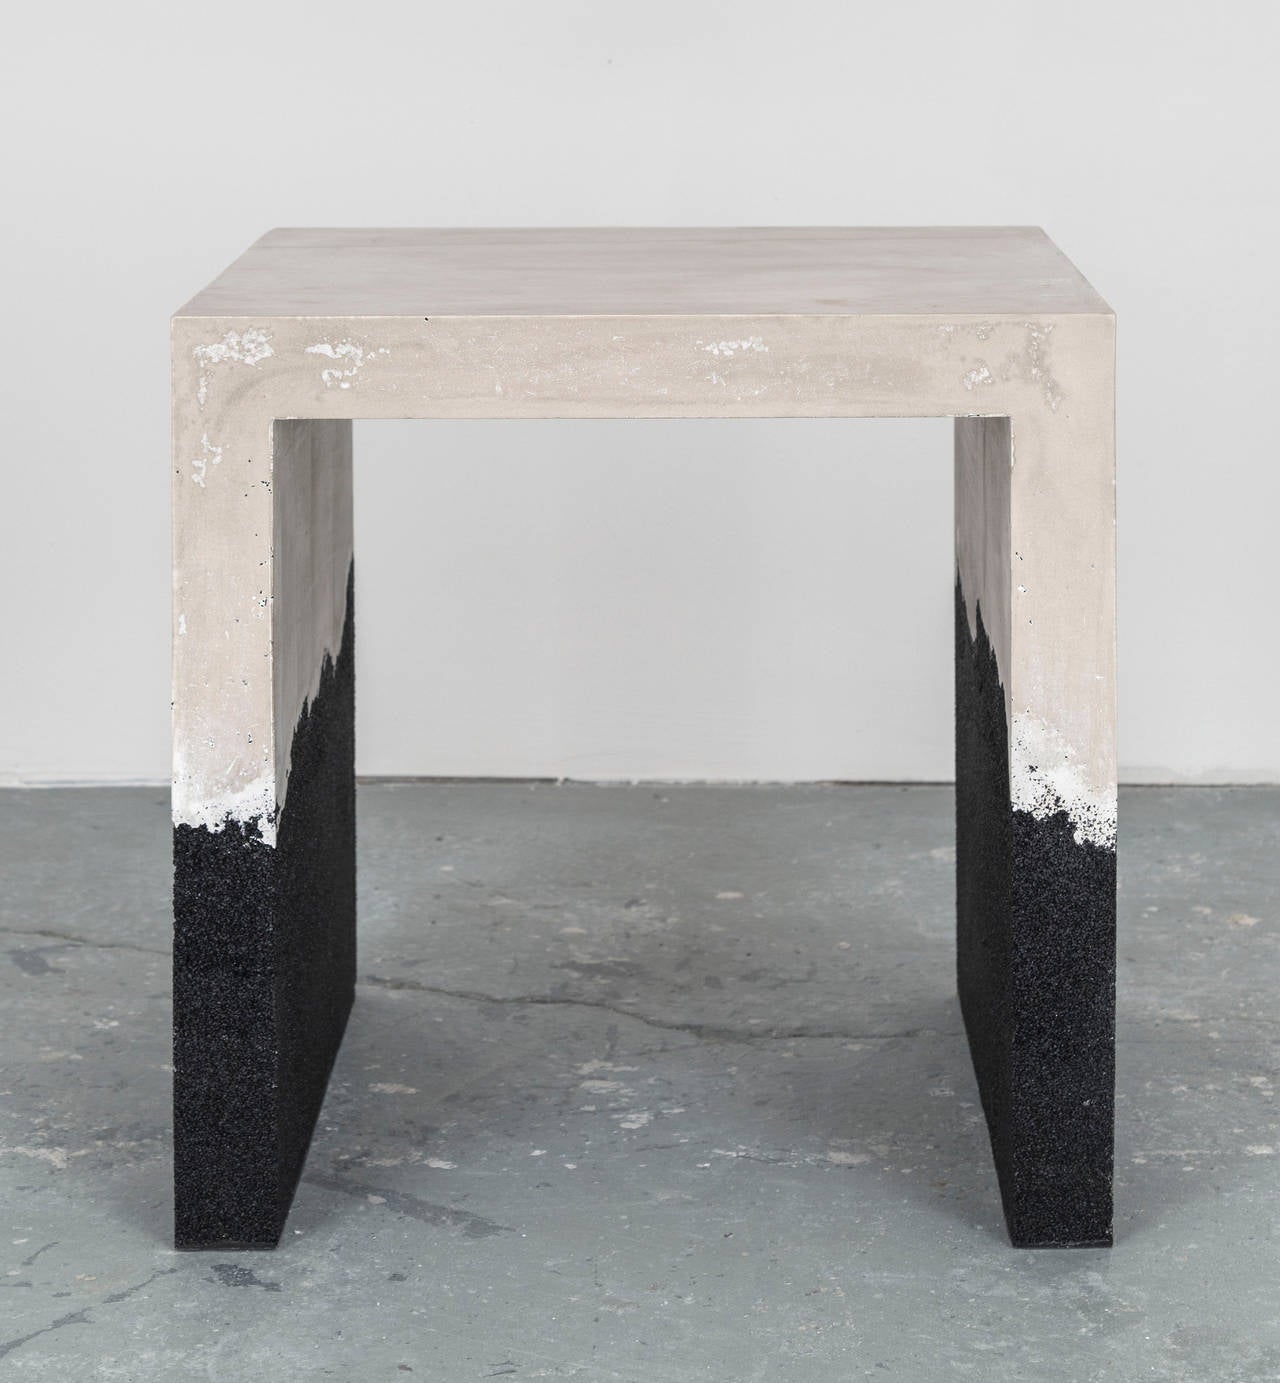 This side table consists of a hand-dyed raw cement top and a black silica bottom. The cement is poured by hand over the silica, creating an organic blend between the two materials.
Custom options available, please inquire with the studio.